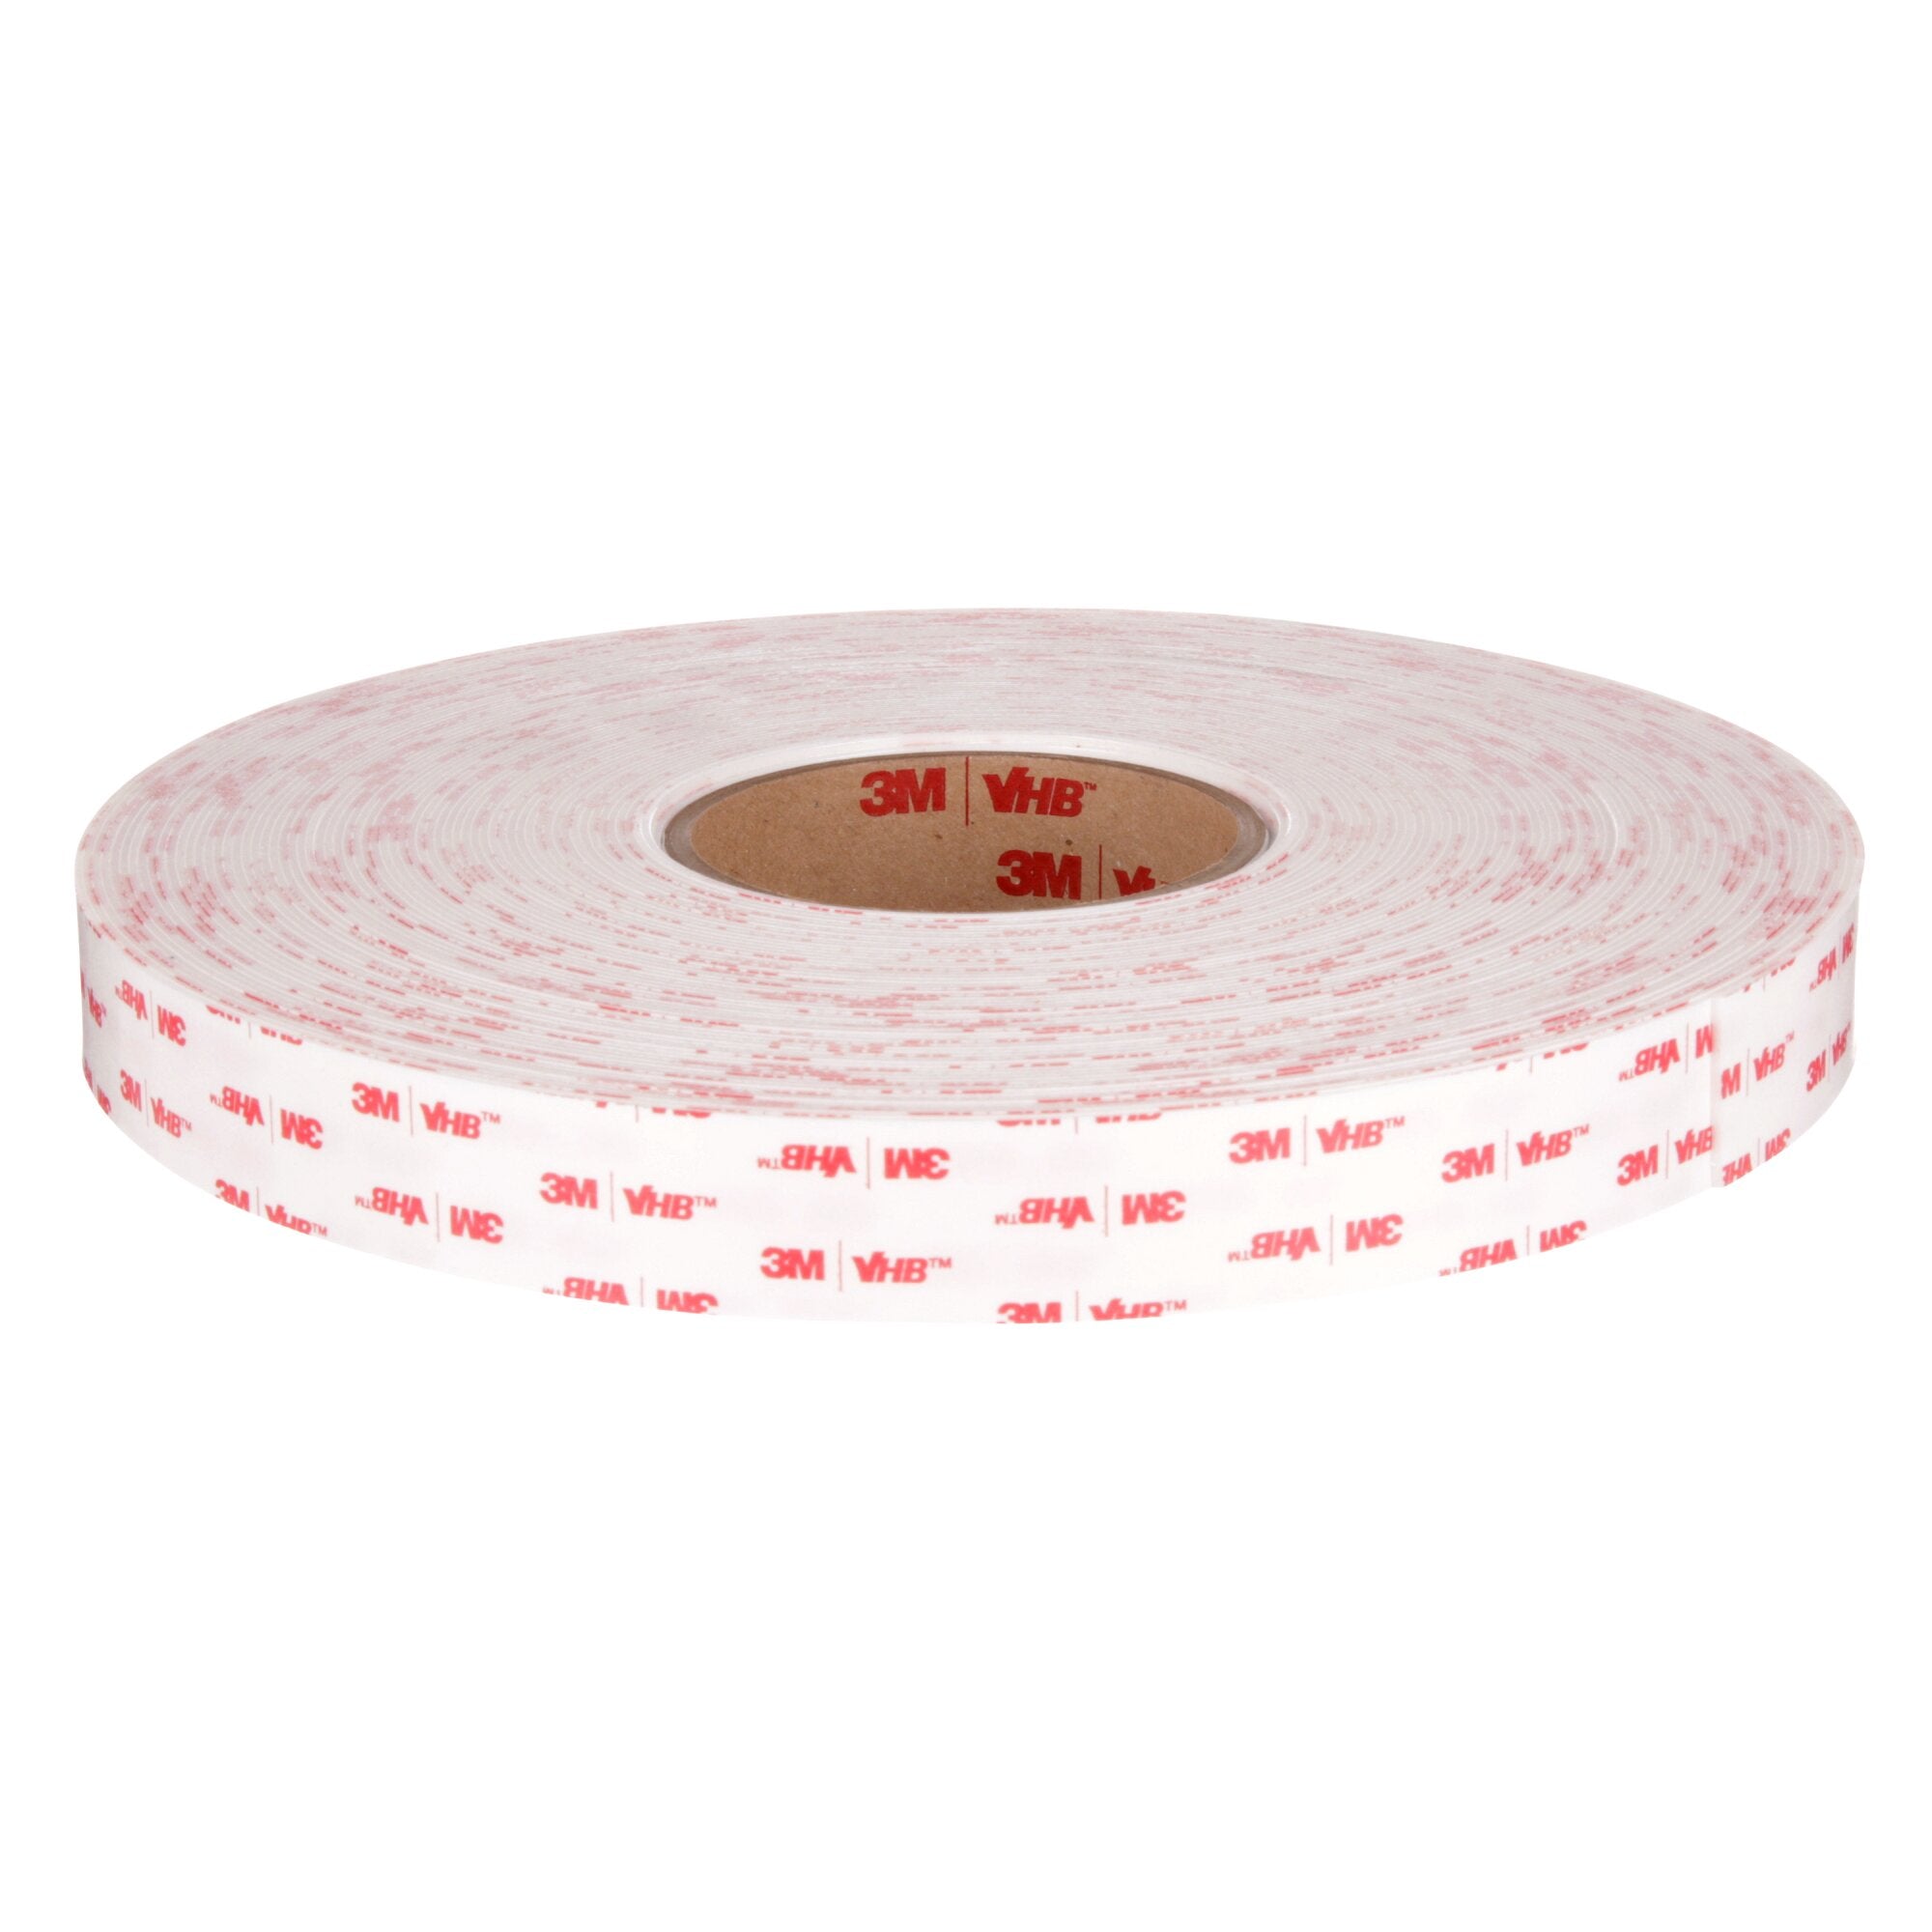 3M VHB Tape 4930, White, 3/4 in x 72 yd, 25 mil, Small Pack